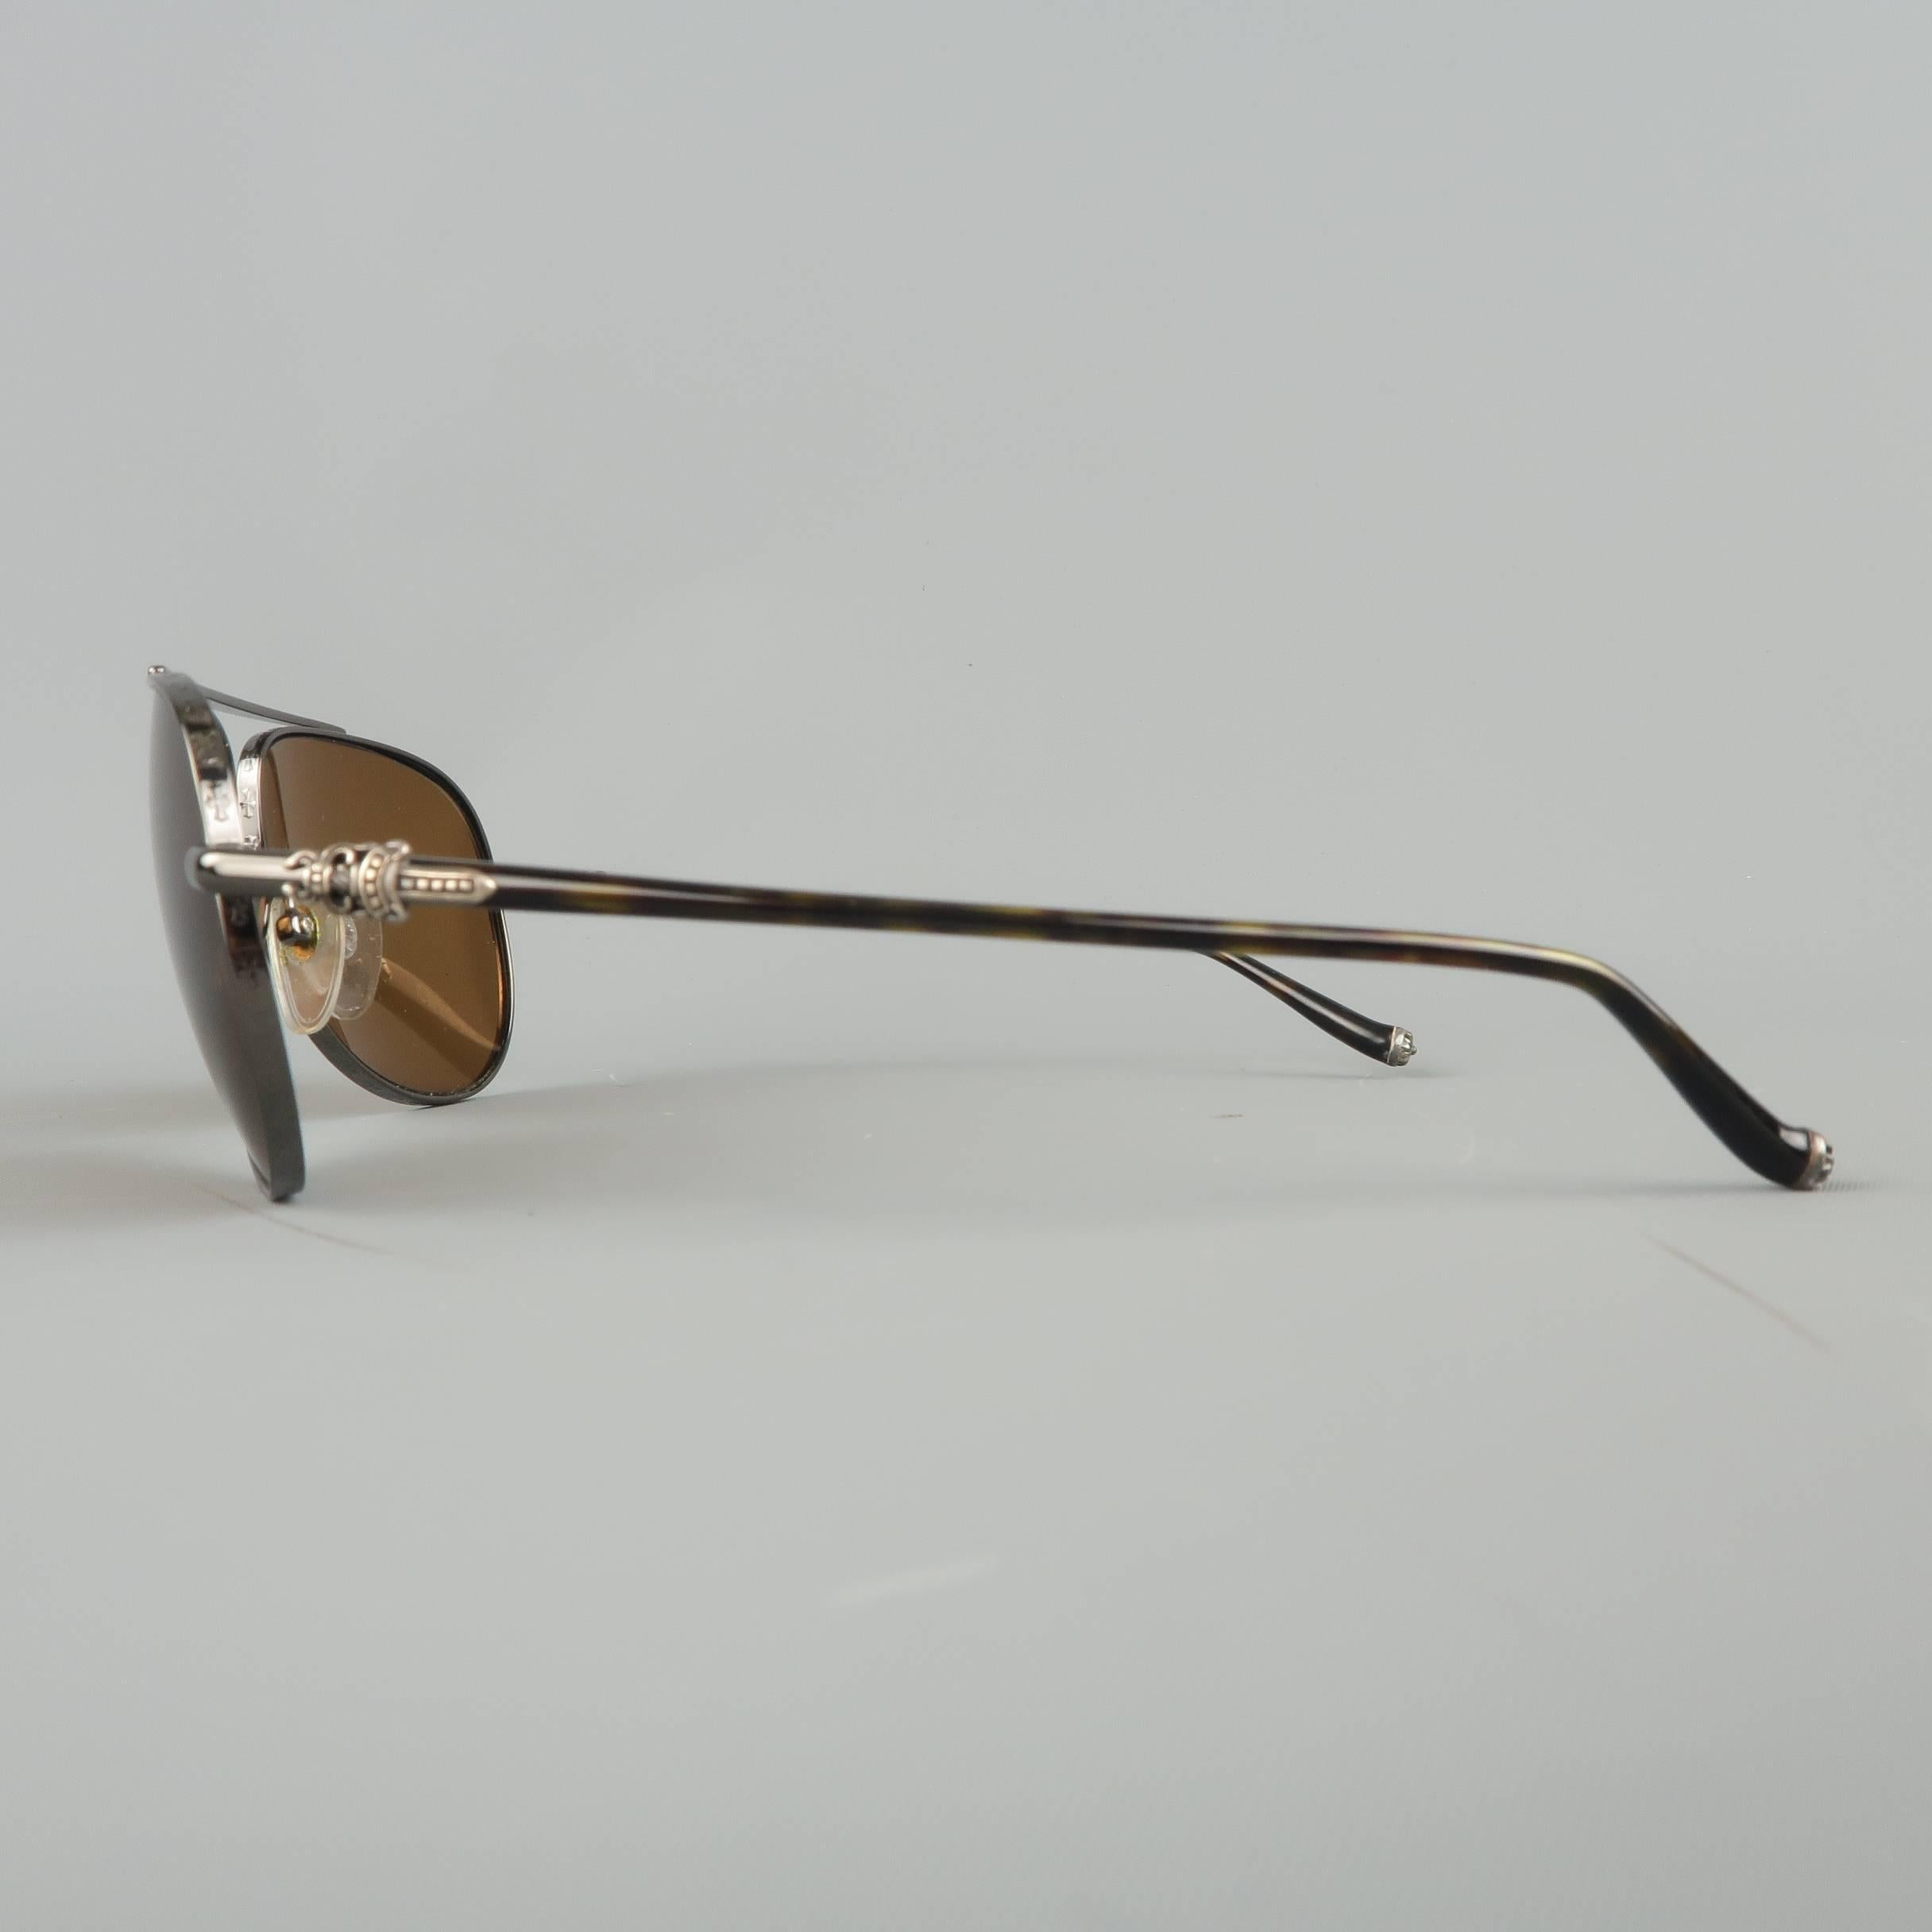 chrome hearts the brown sunglasses